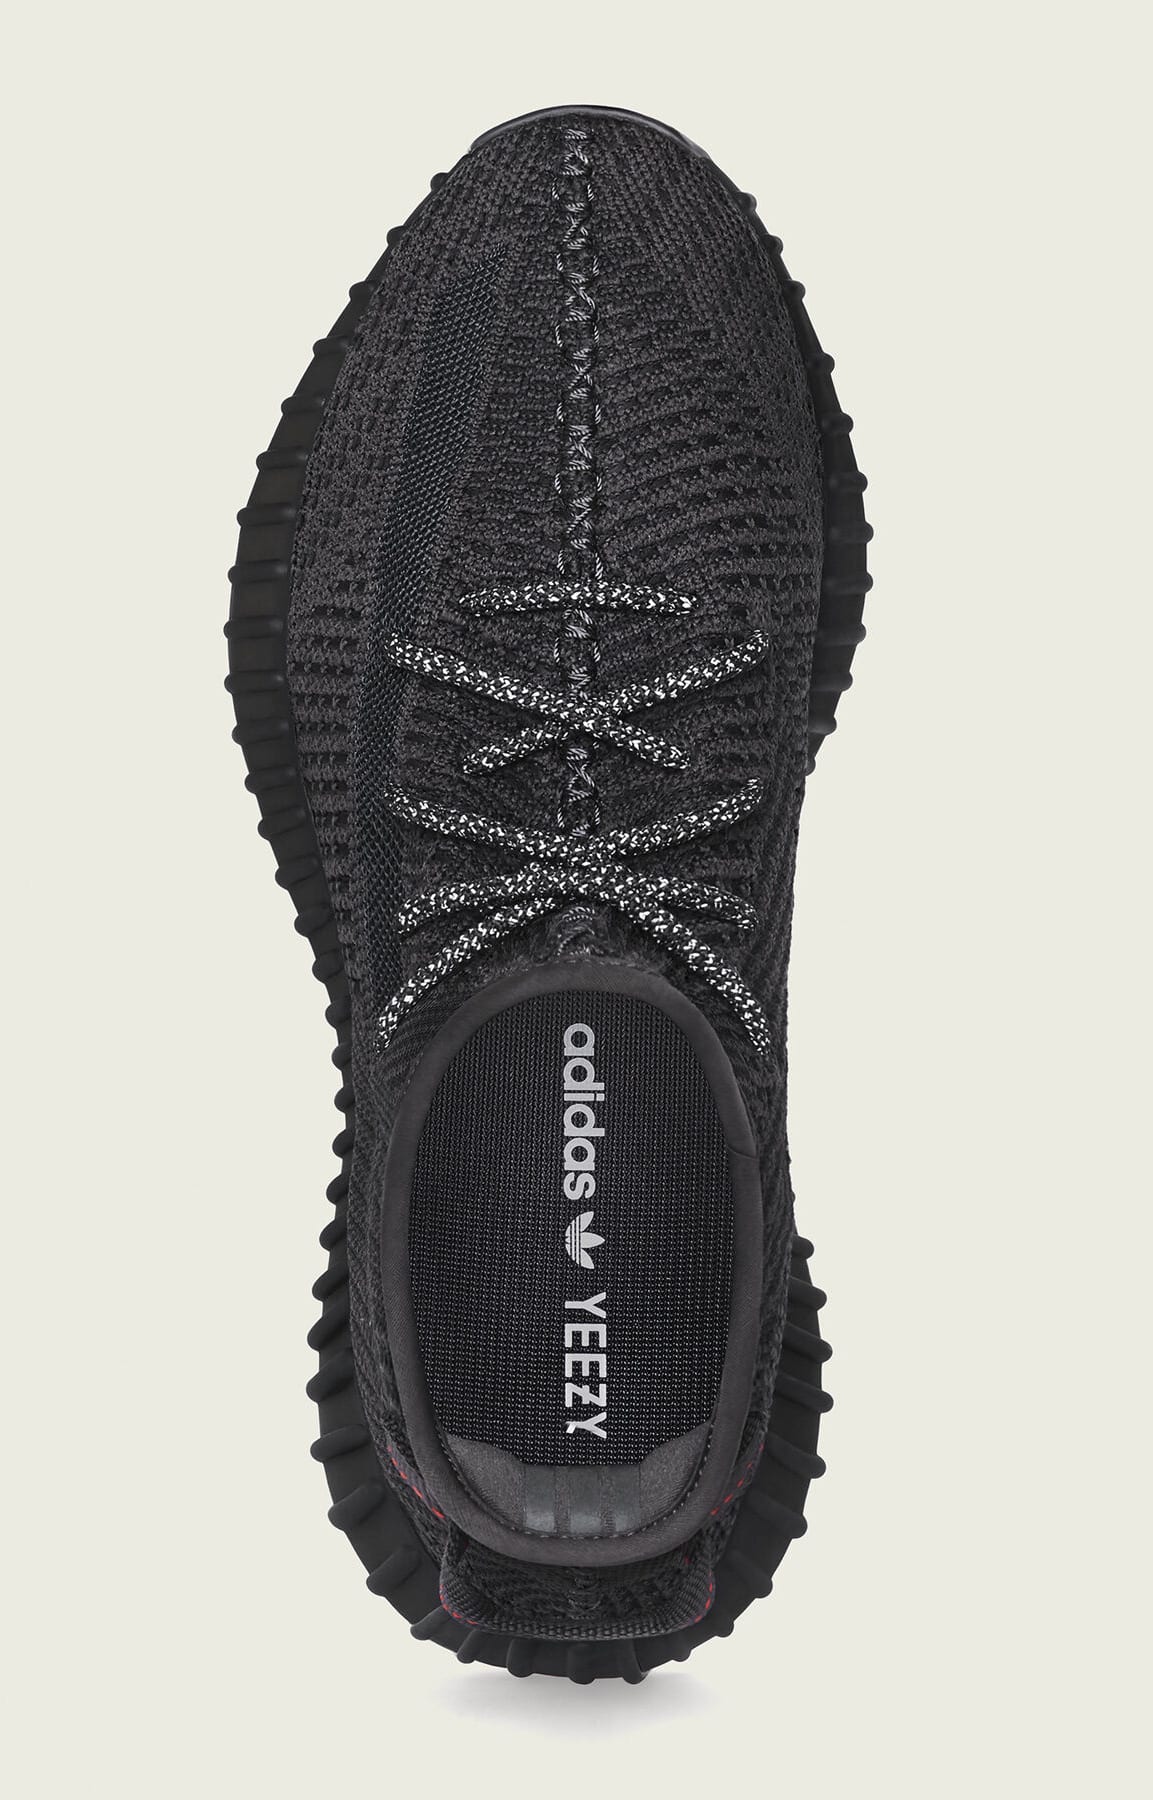 Black Yeezy Boost V2 Is Restocking on Complex